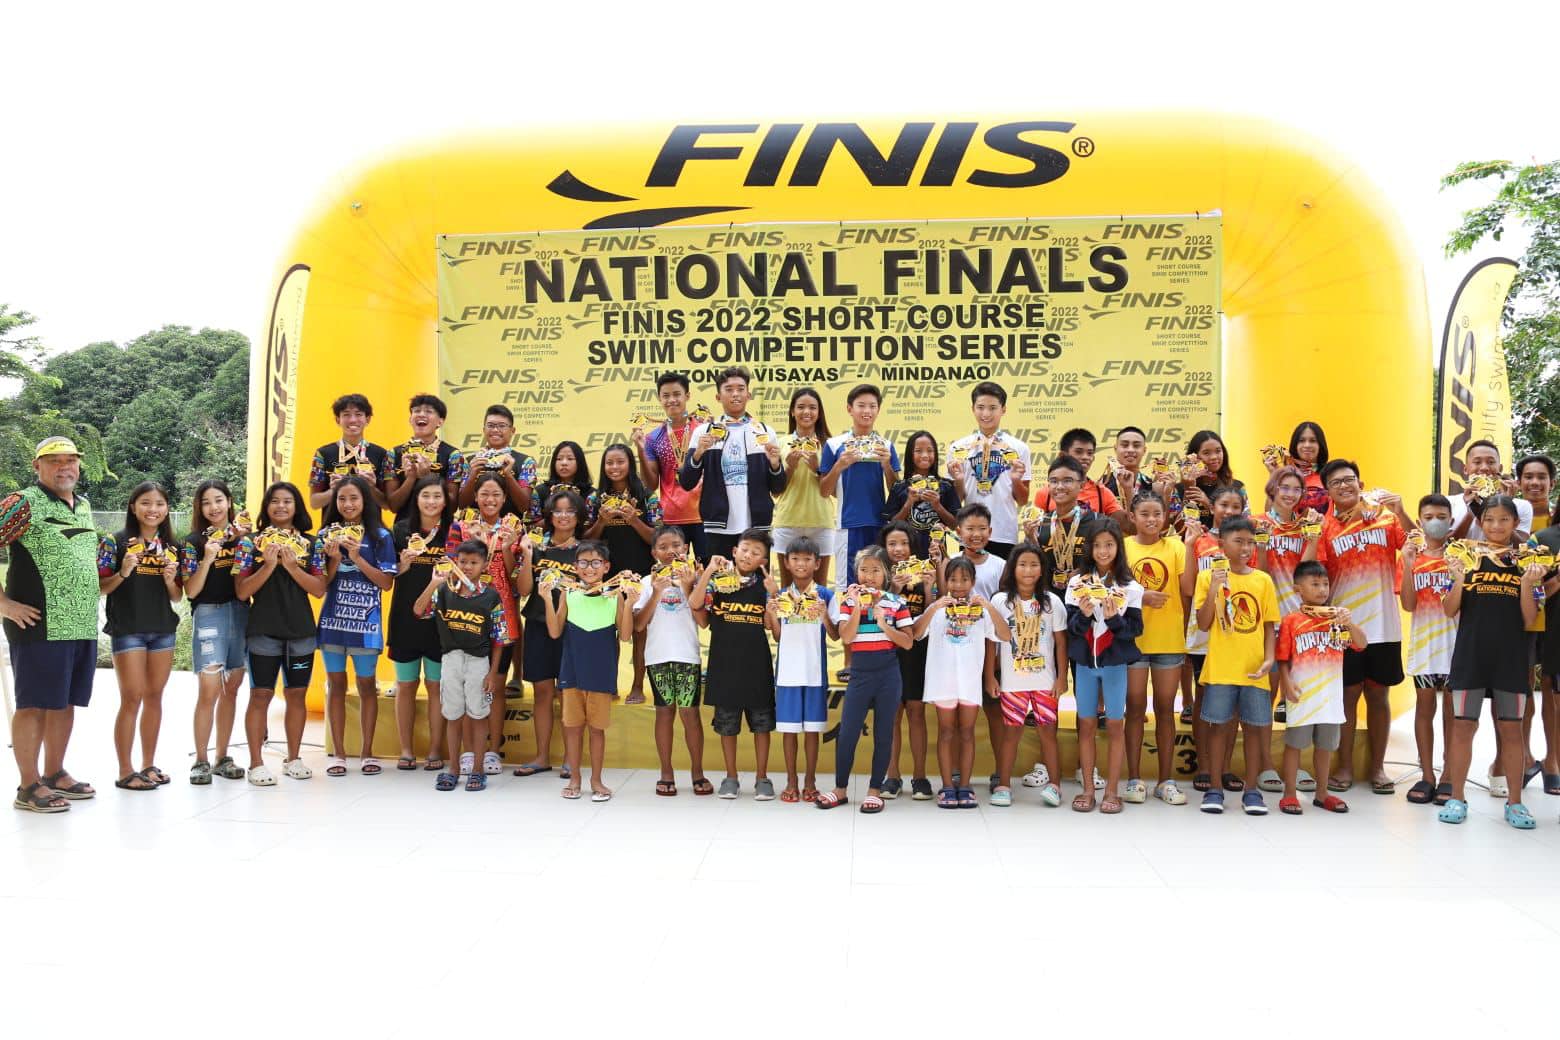 FINIS Short Course National Finals